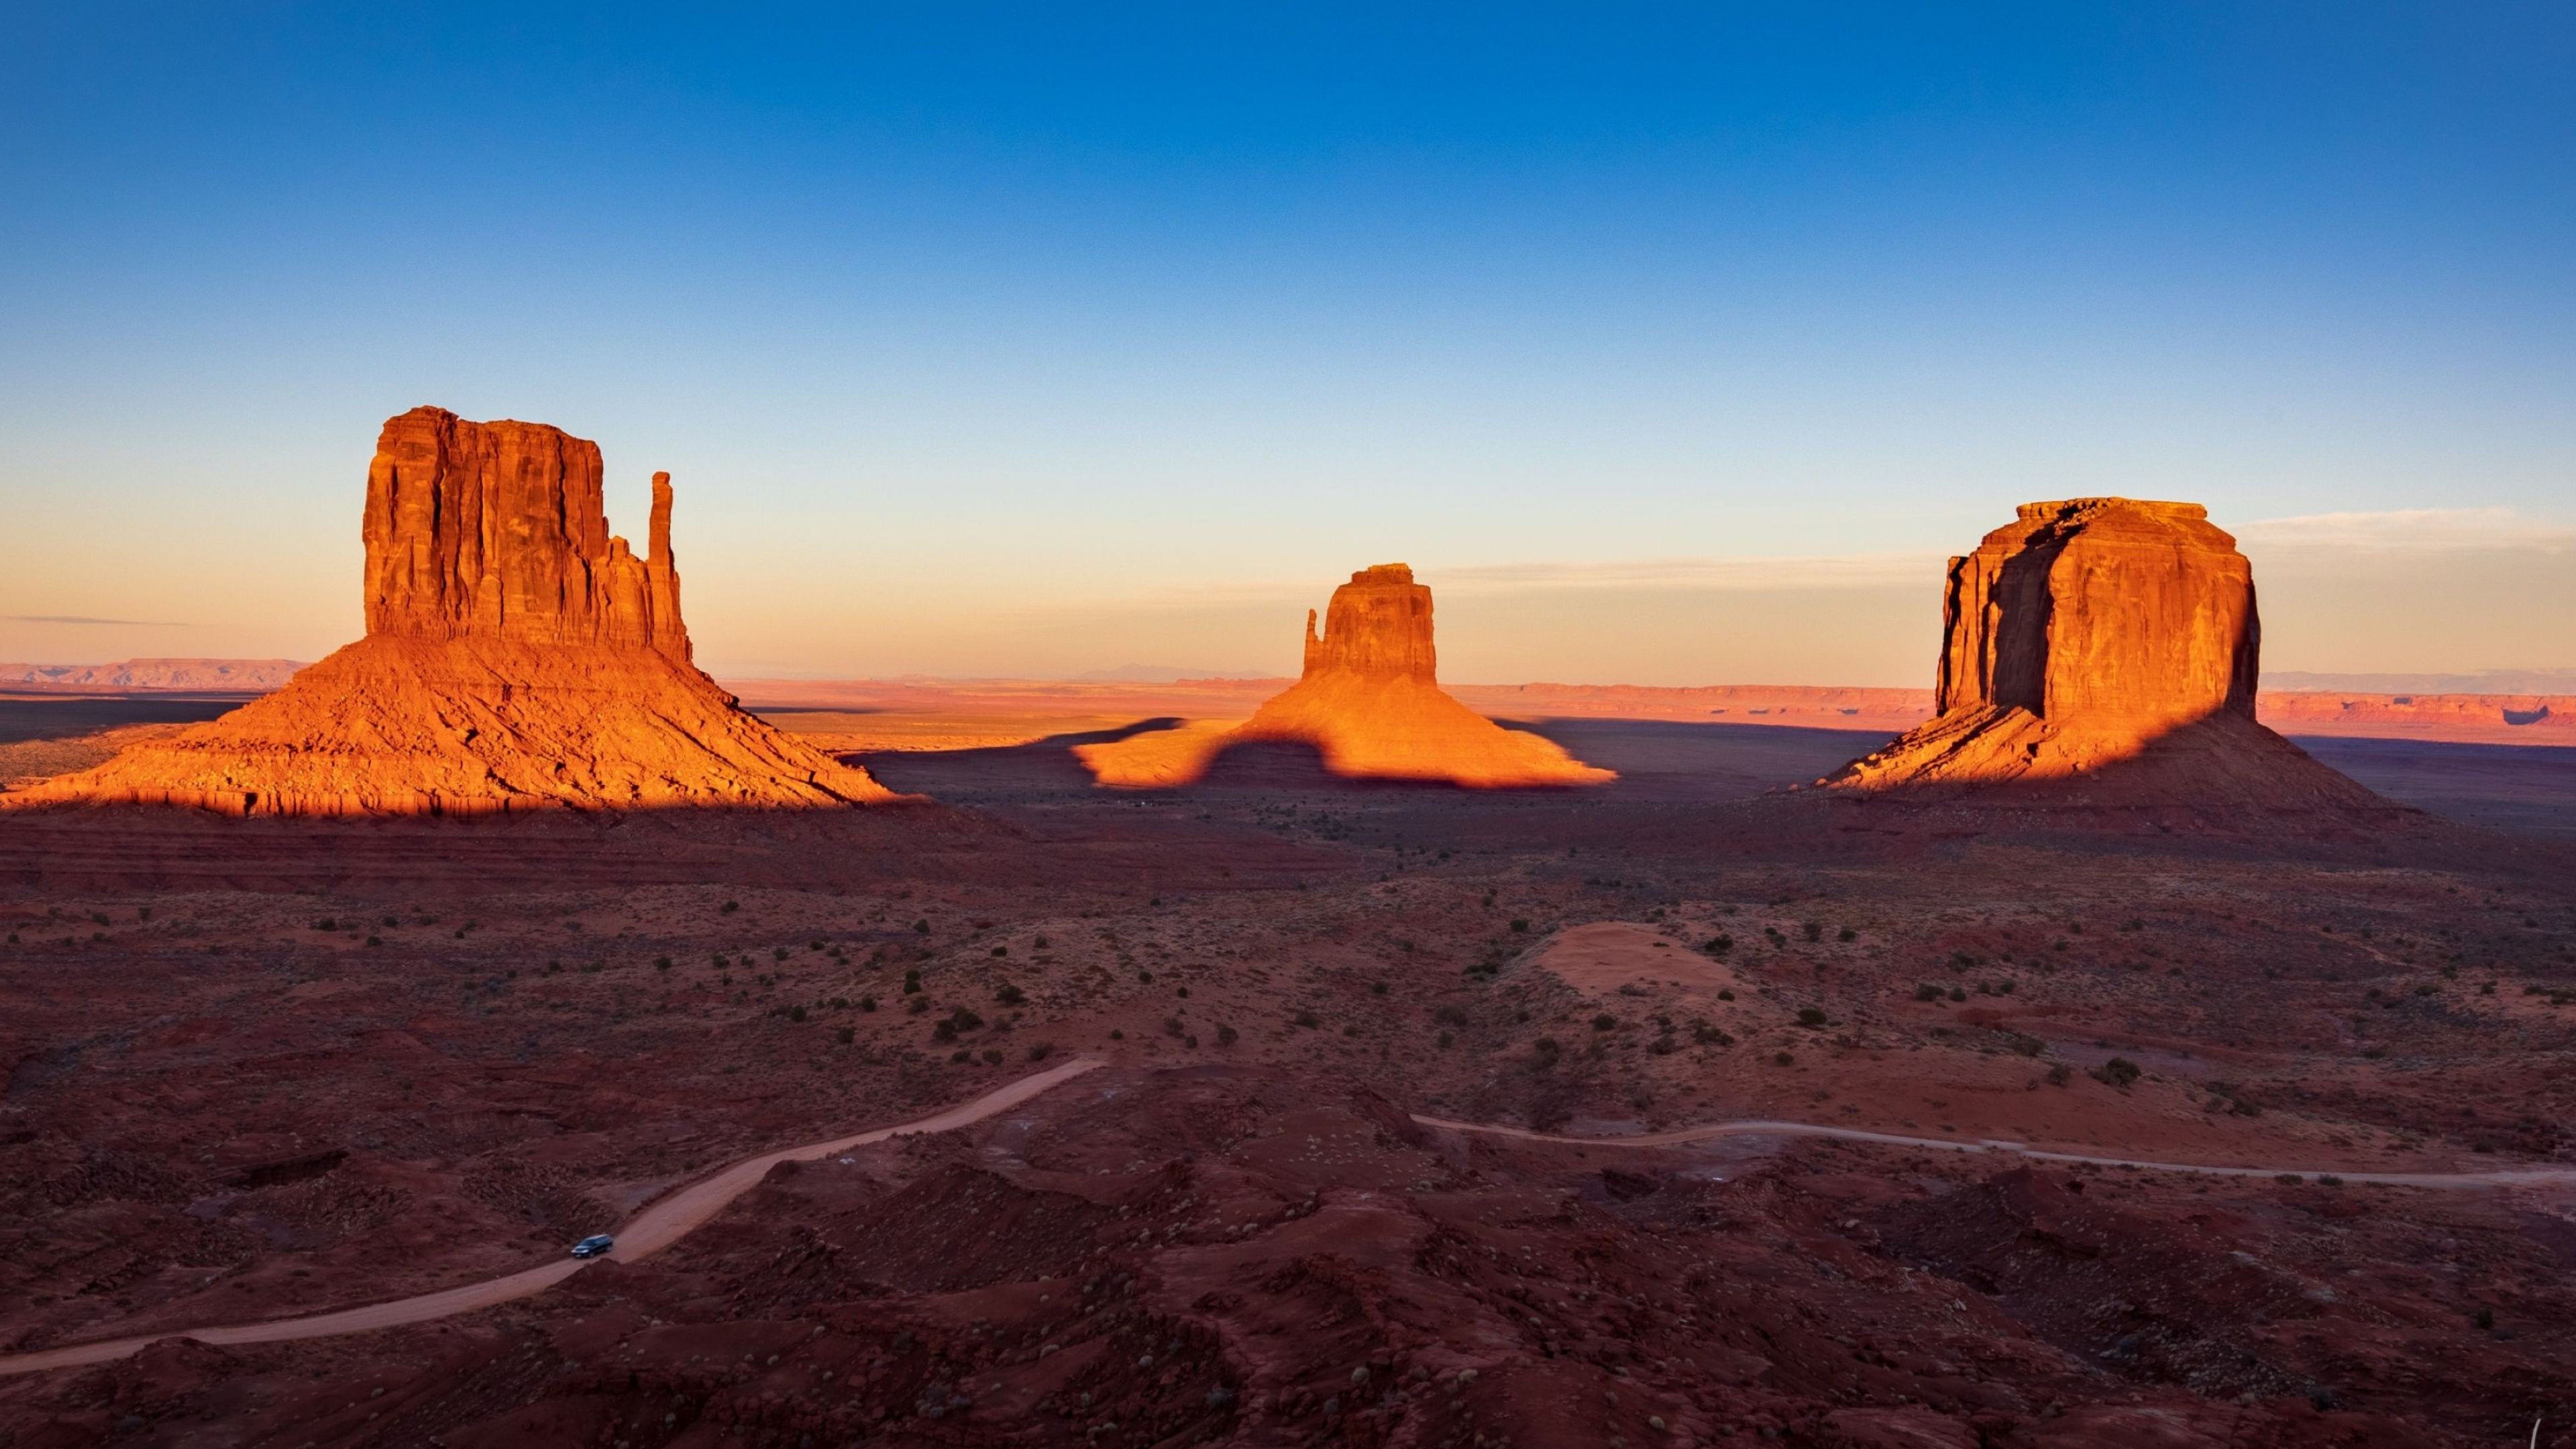 Monument Valley sunset wallpapers, Top free backgrounds, Breathtaking landscapes, Nature's masterpiece, 3840x2160 4K Desktop